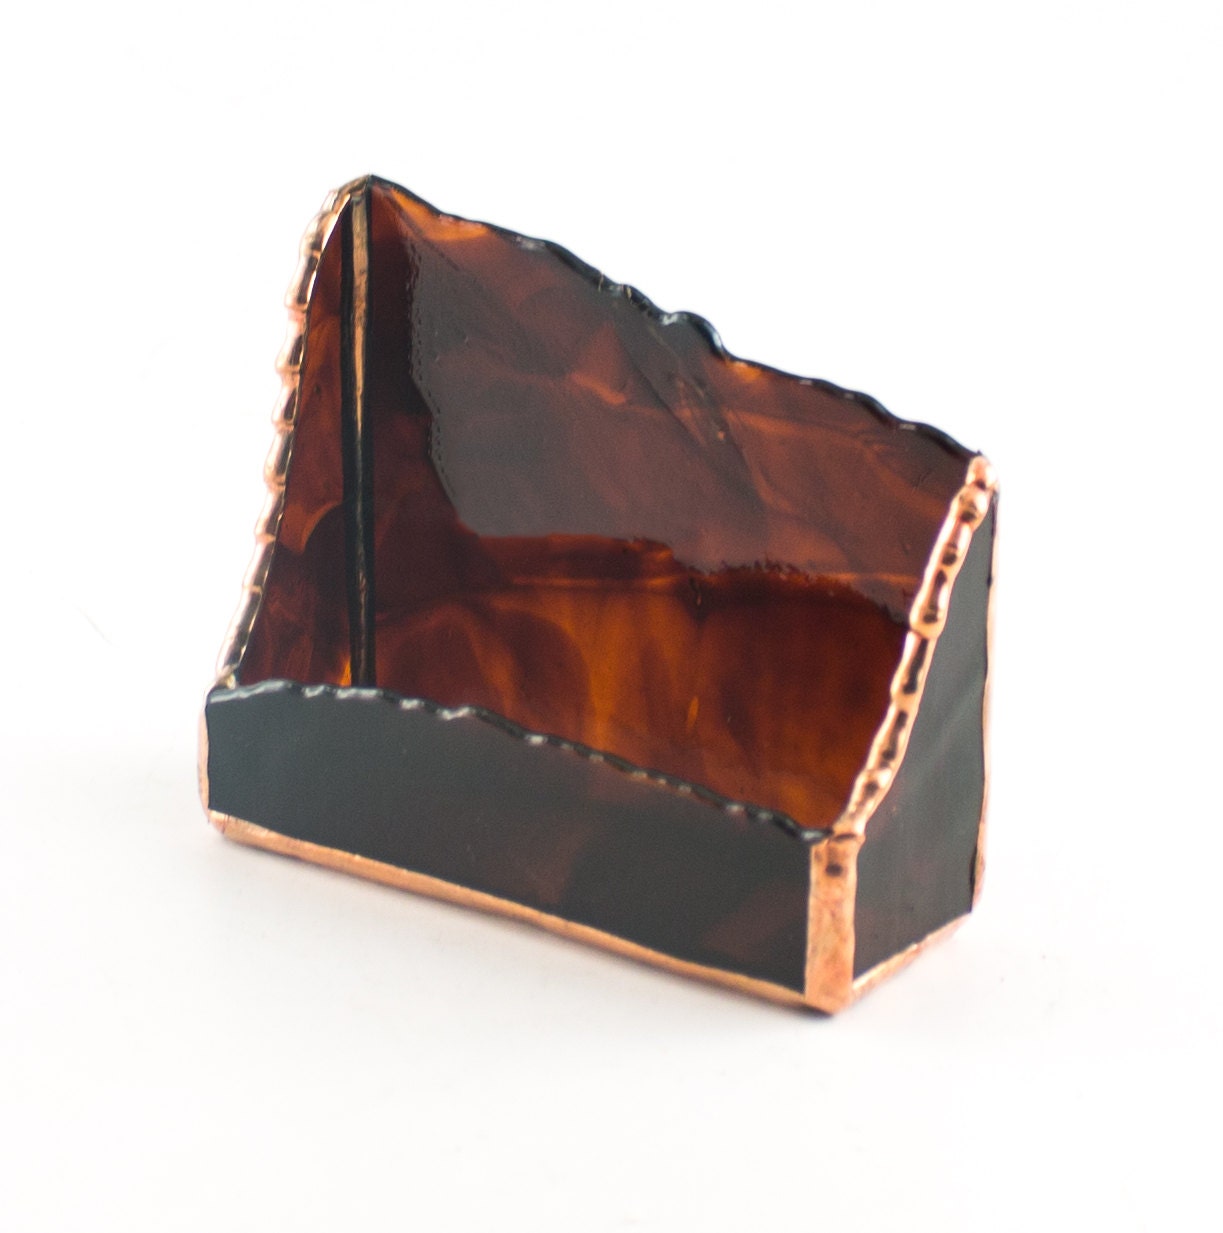 Unique Business Card Holder Modern Desk Accessories Stained